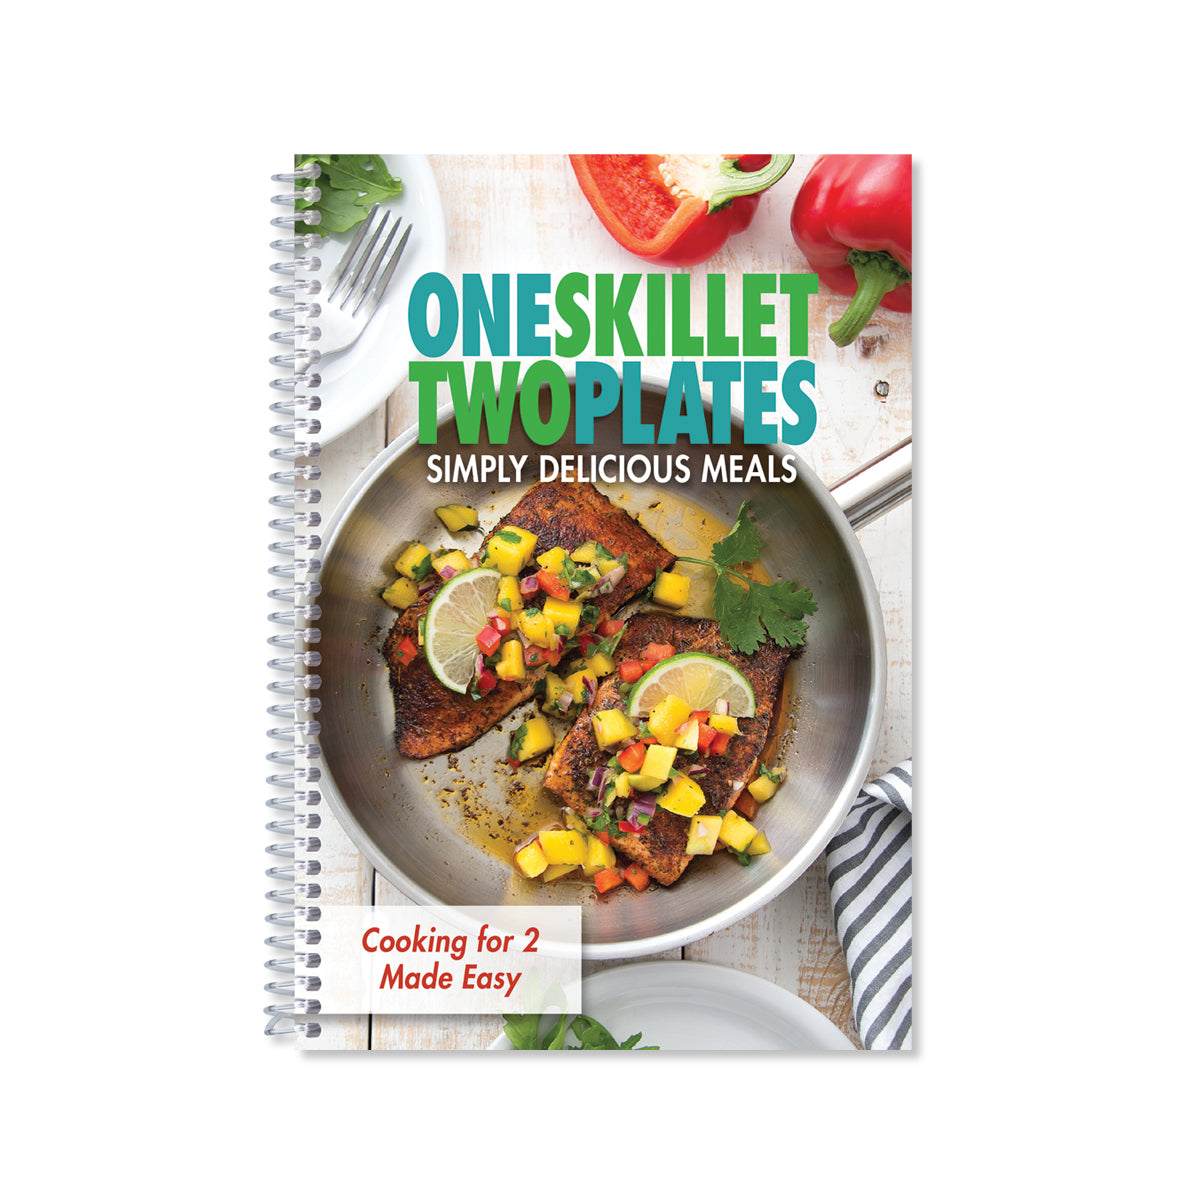 One Skillet, Two Plates Cookbook. Simply Delicious Meals.